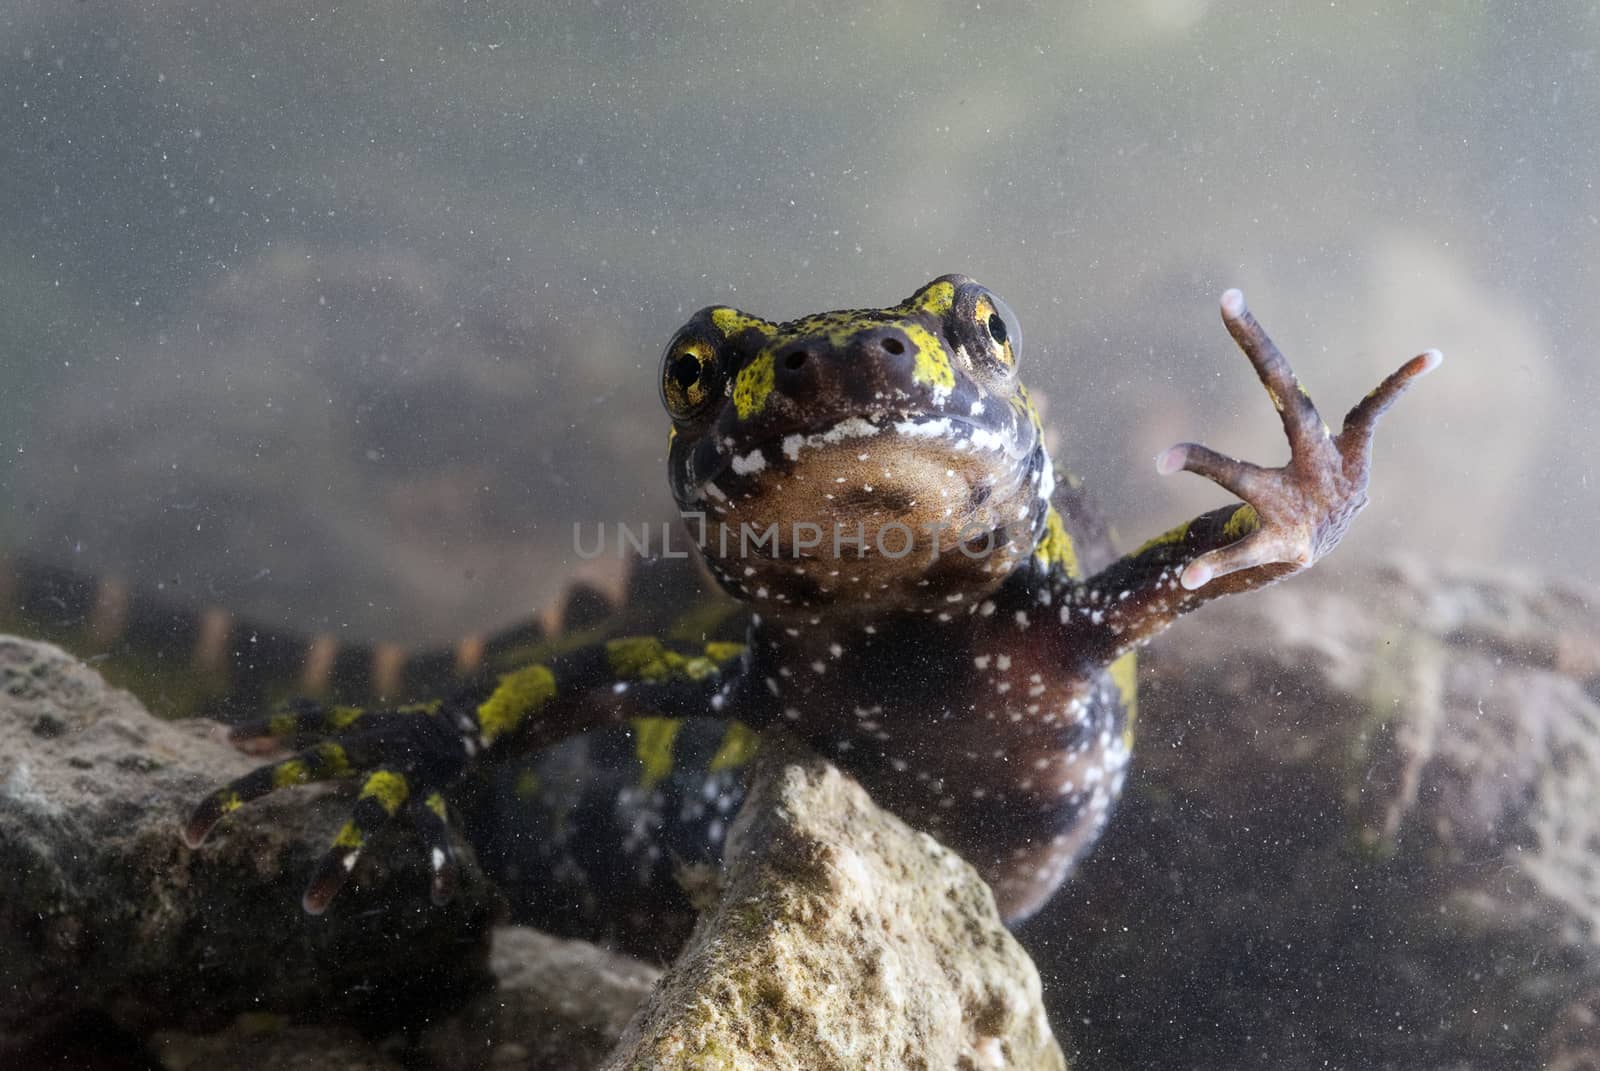 Marbled newt, Triturus marmoratus in the water, crest, amphibian by jalonsohu@gmail.com